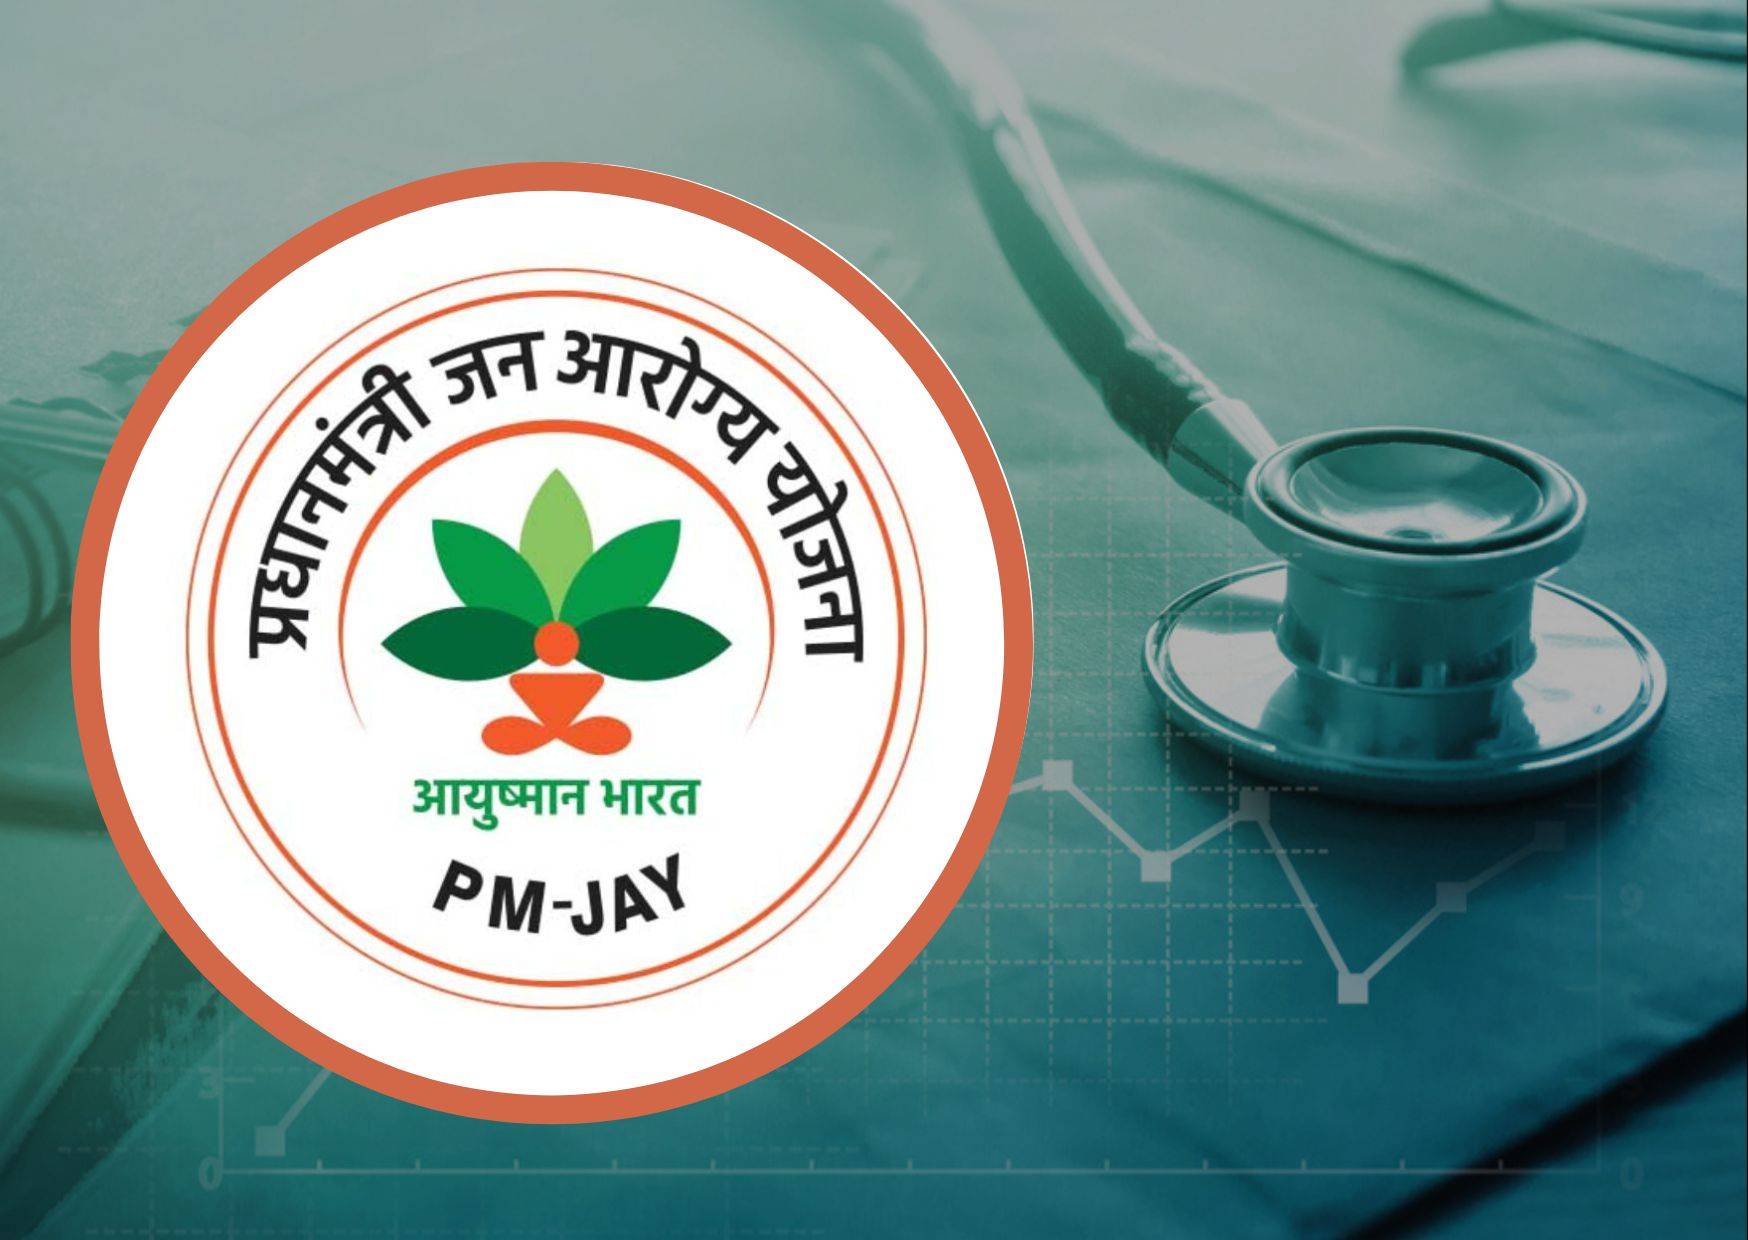 In a Landmark step, Transgender Persons to get Composite Healthcare services under Ayushman Bharat